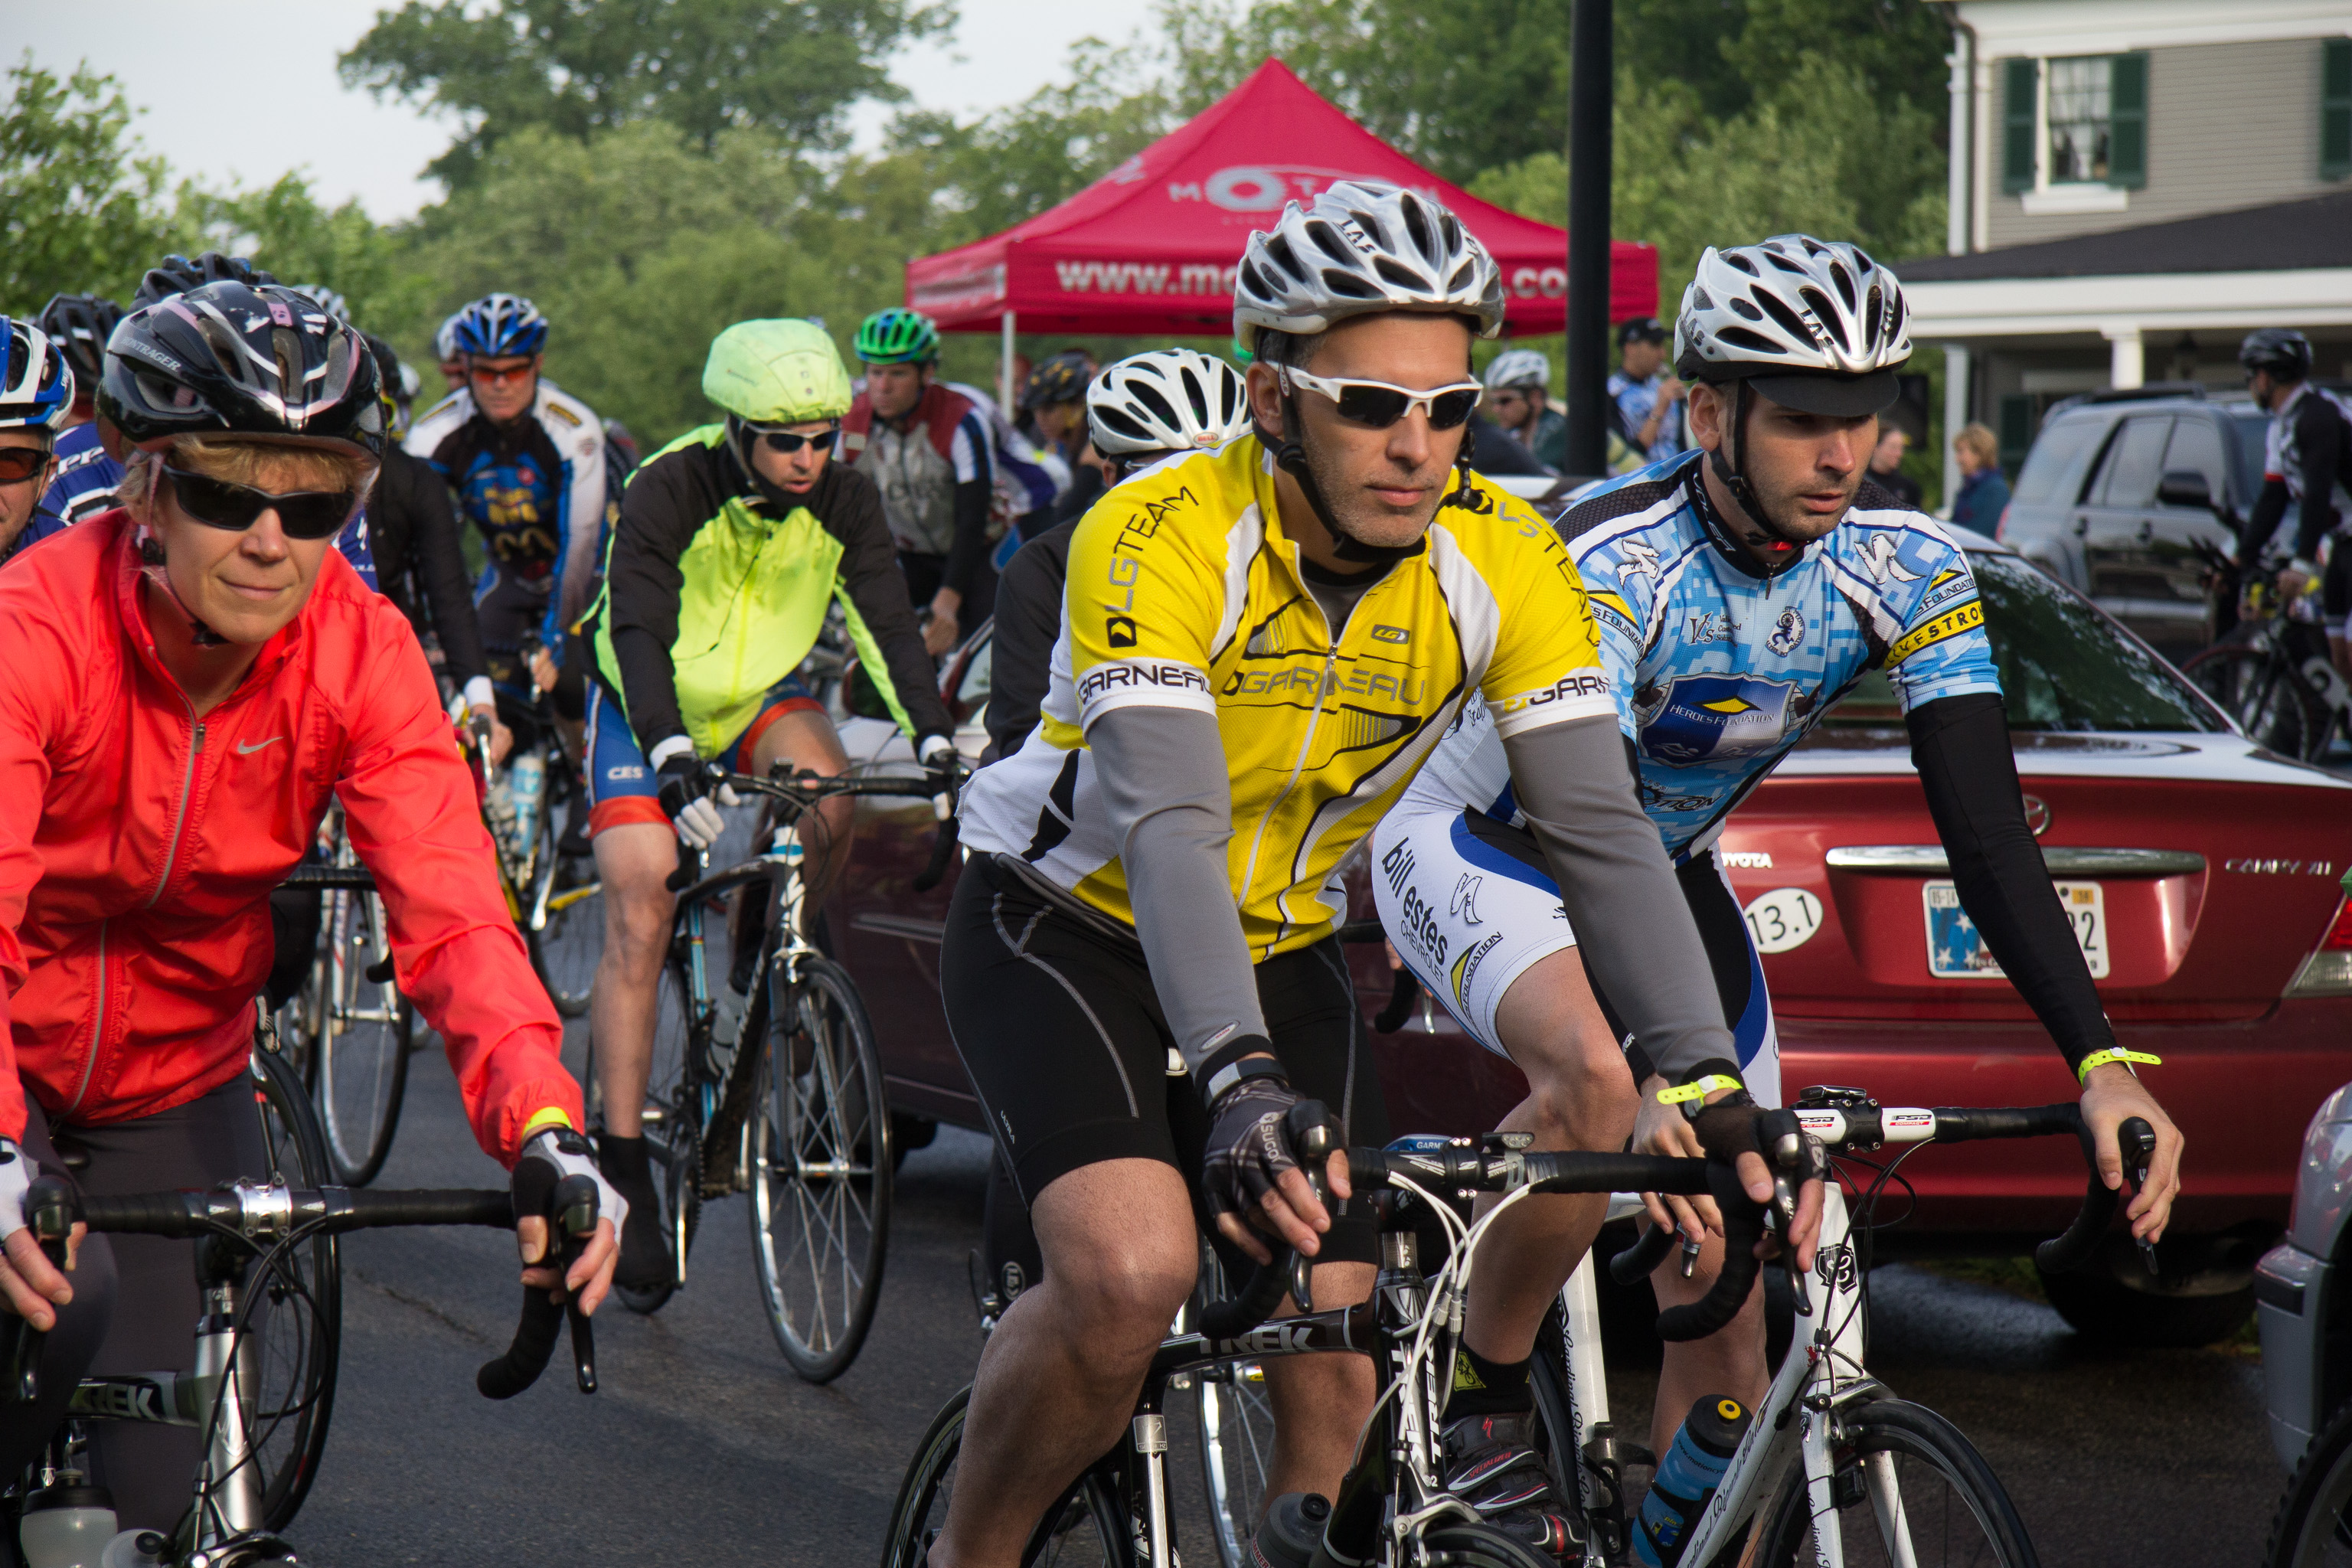 2103 Give Hope Ride participants